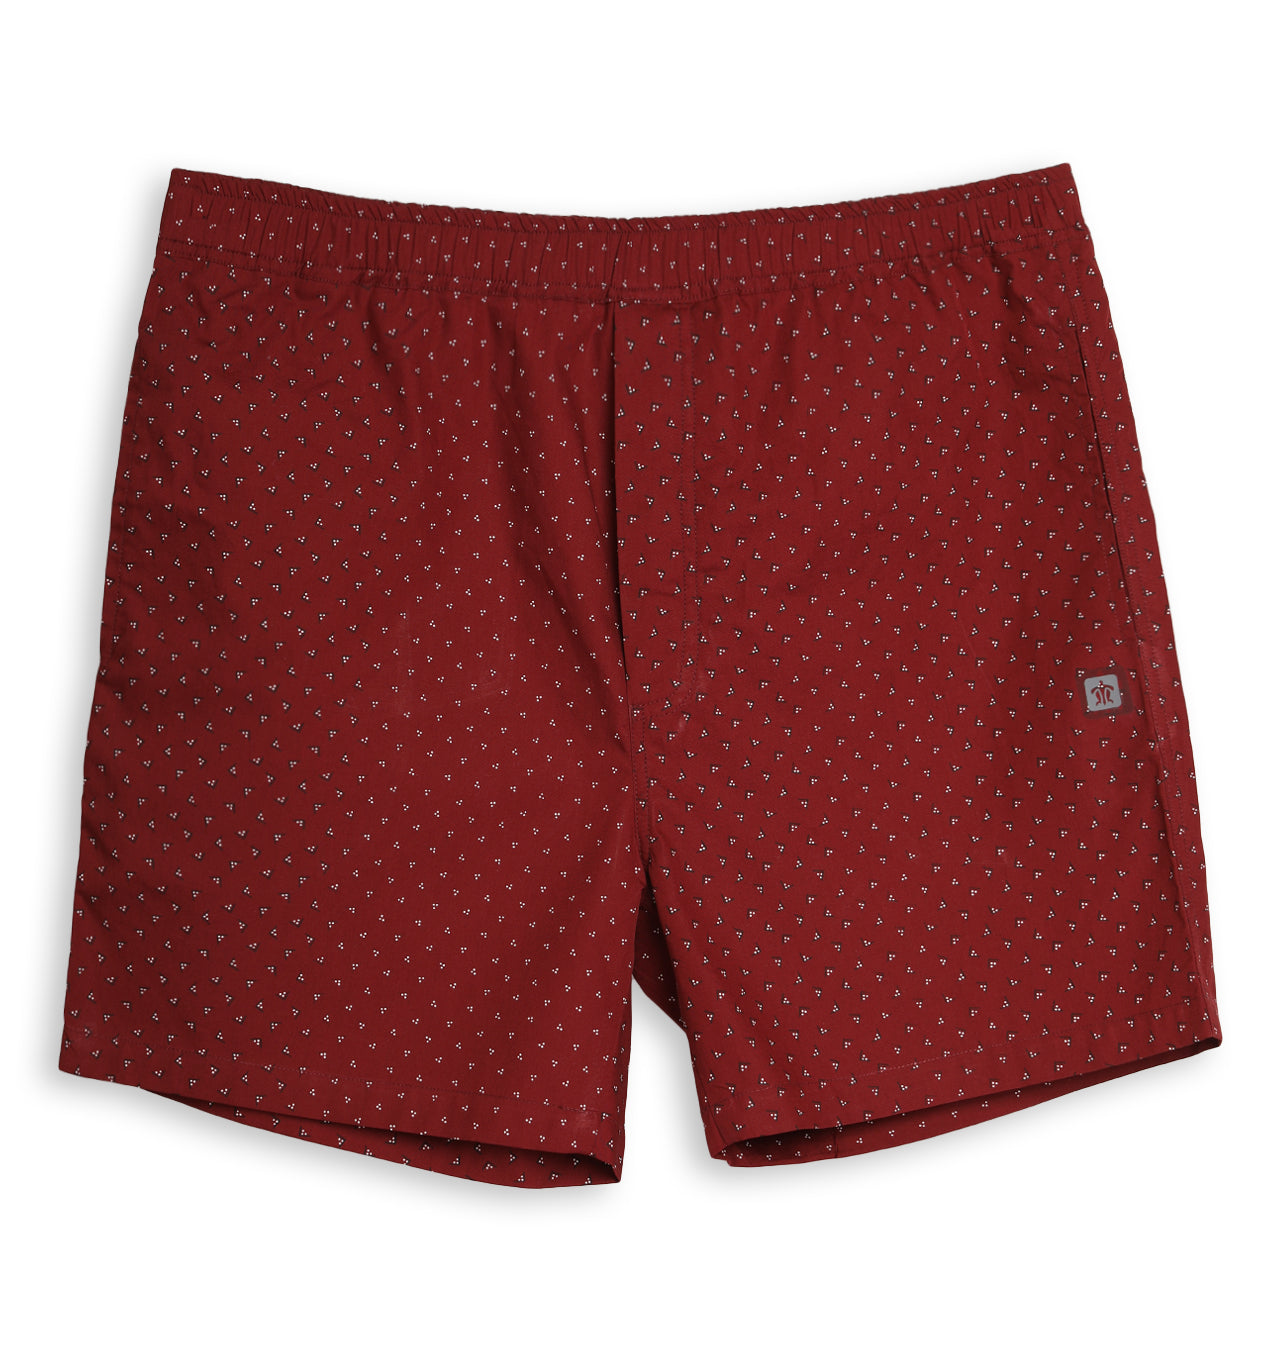 Black Check & Maroon Print Cotton Boxers For Men (Pack of 2)